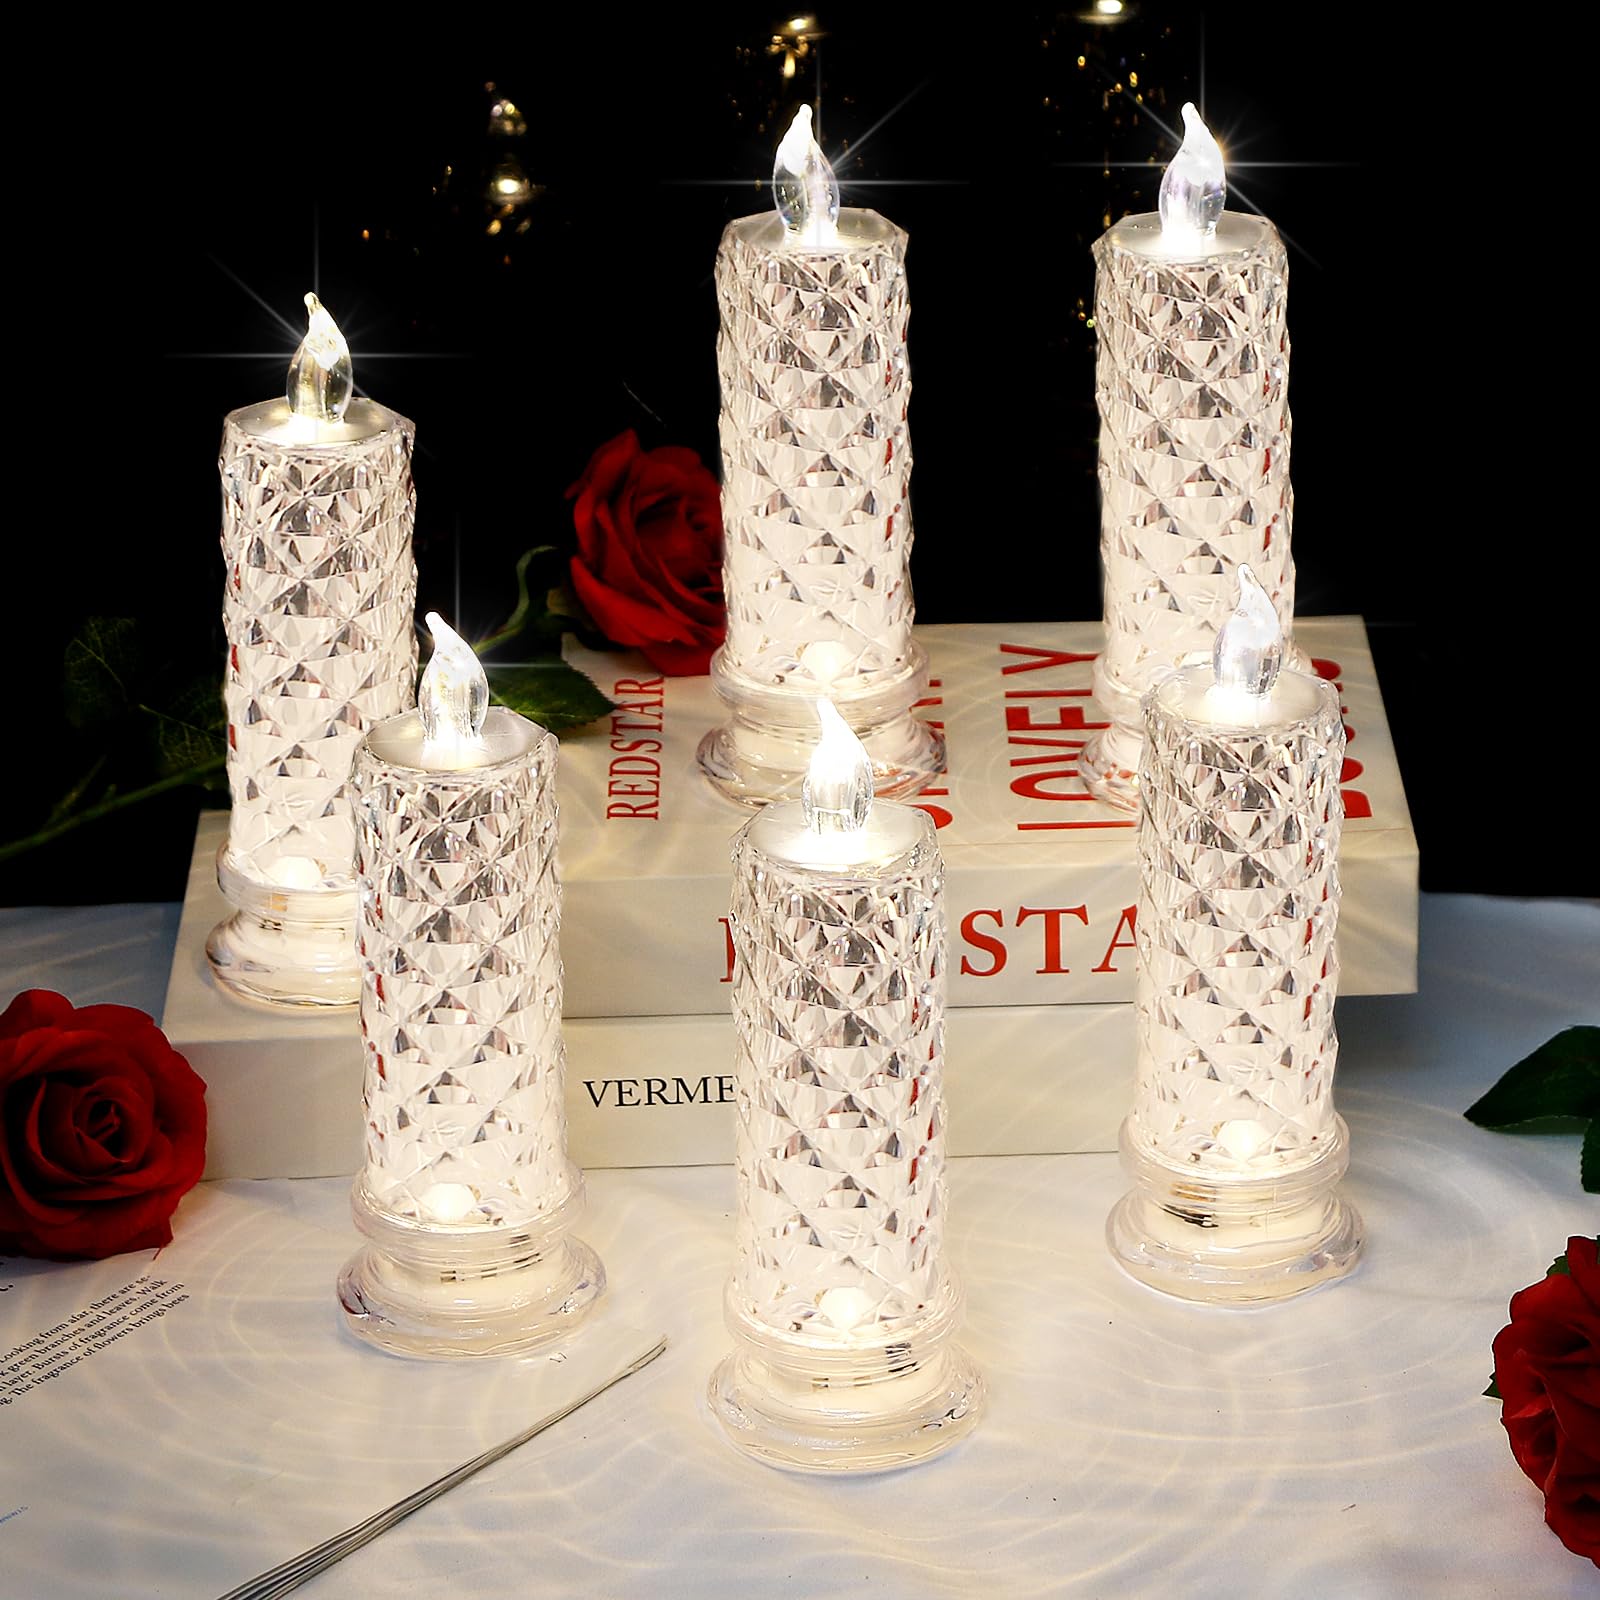 LACGO 6 PCS Rose Shadow Flameless Candles $17.04